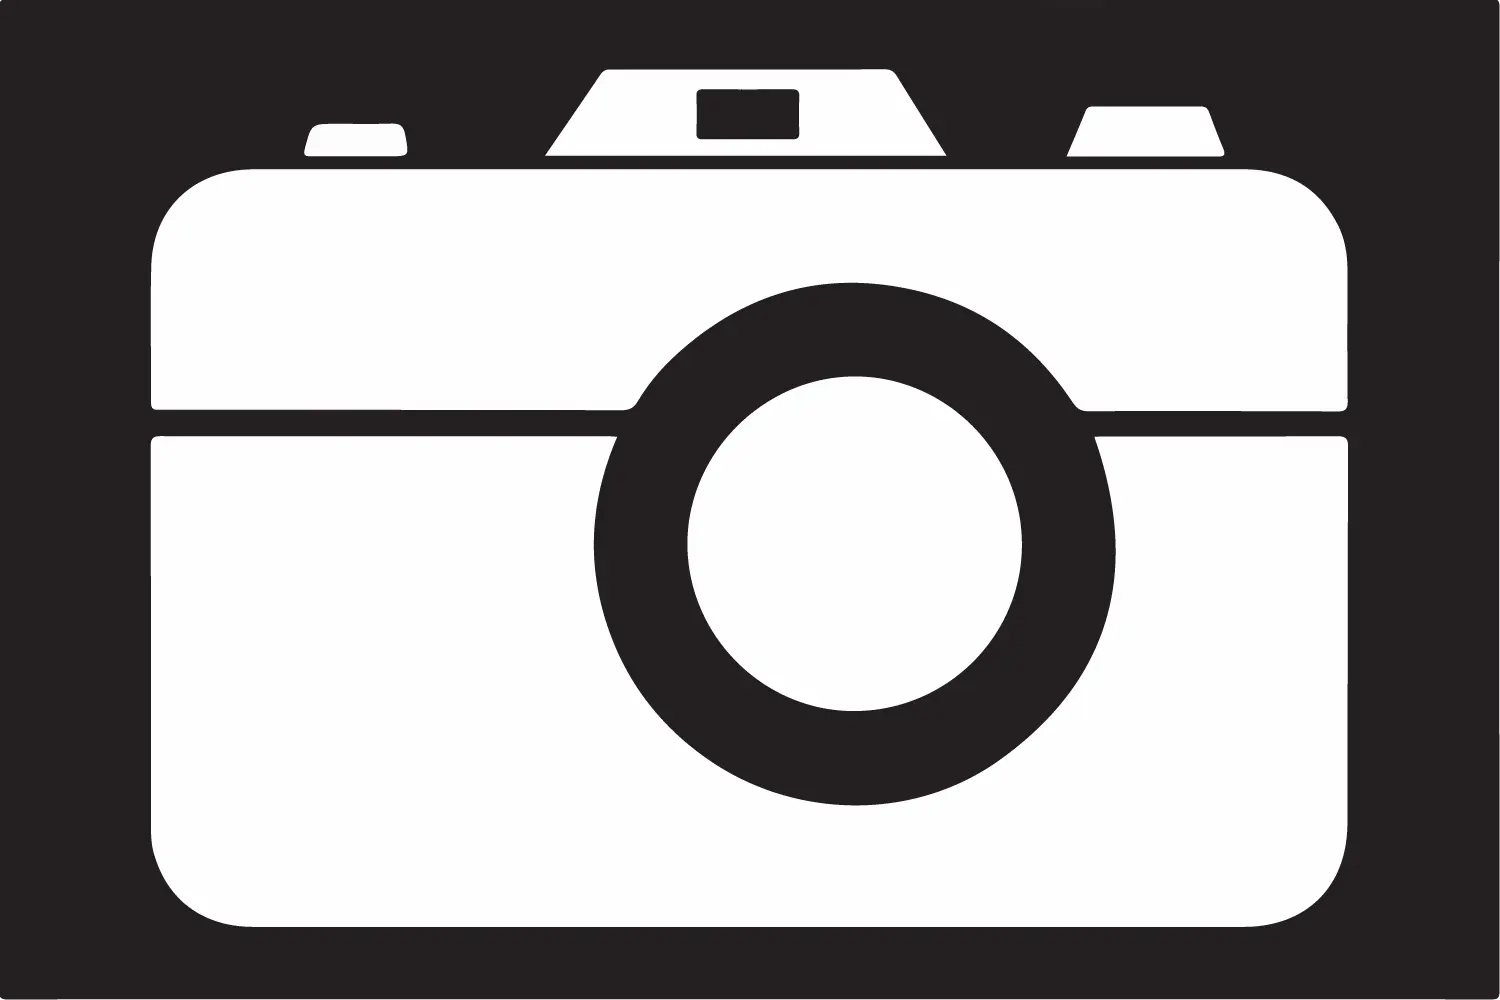 Graphic of white camera on black background. No image available for this post.